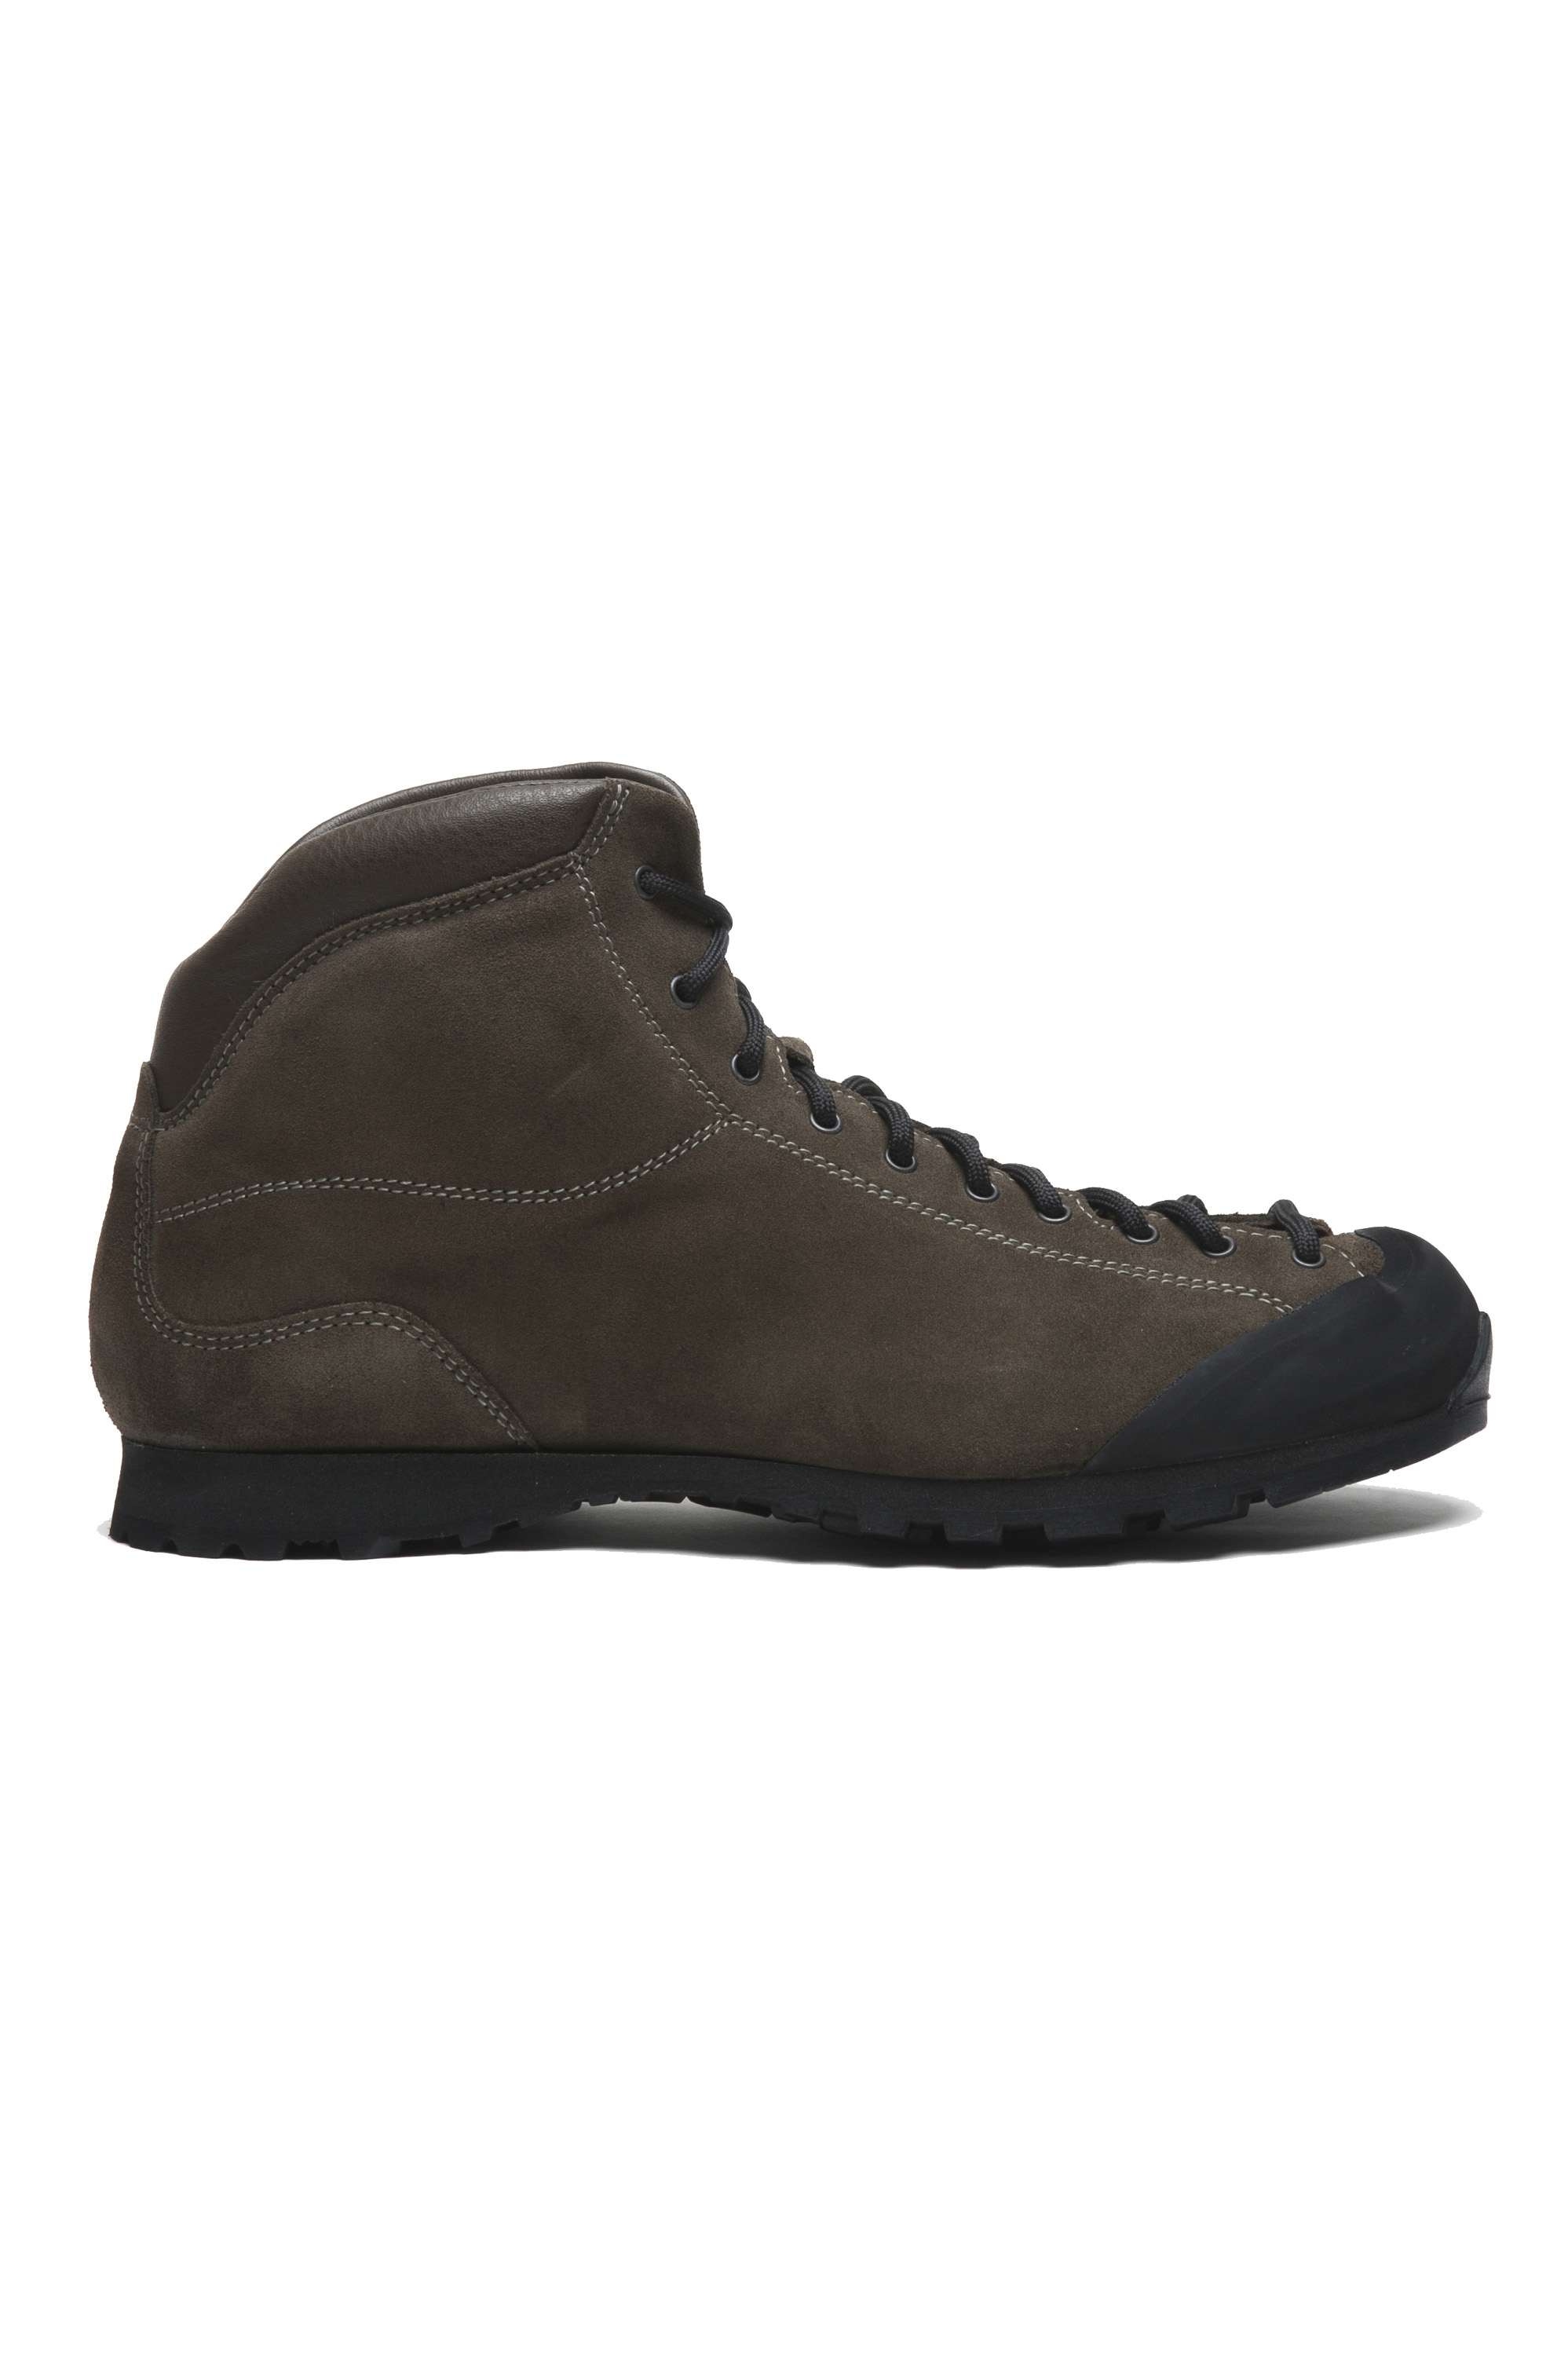 SBU 02959_2020AW Hiking boots in green calfskin suede leather 01